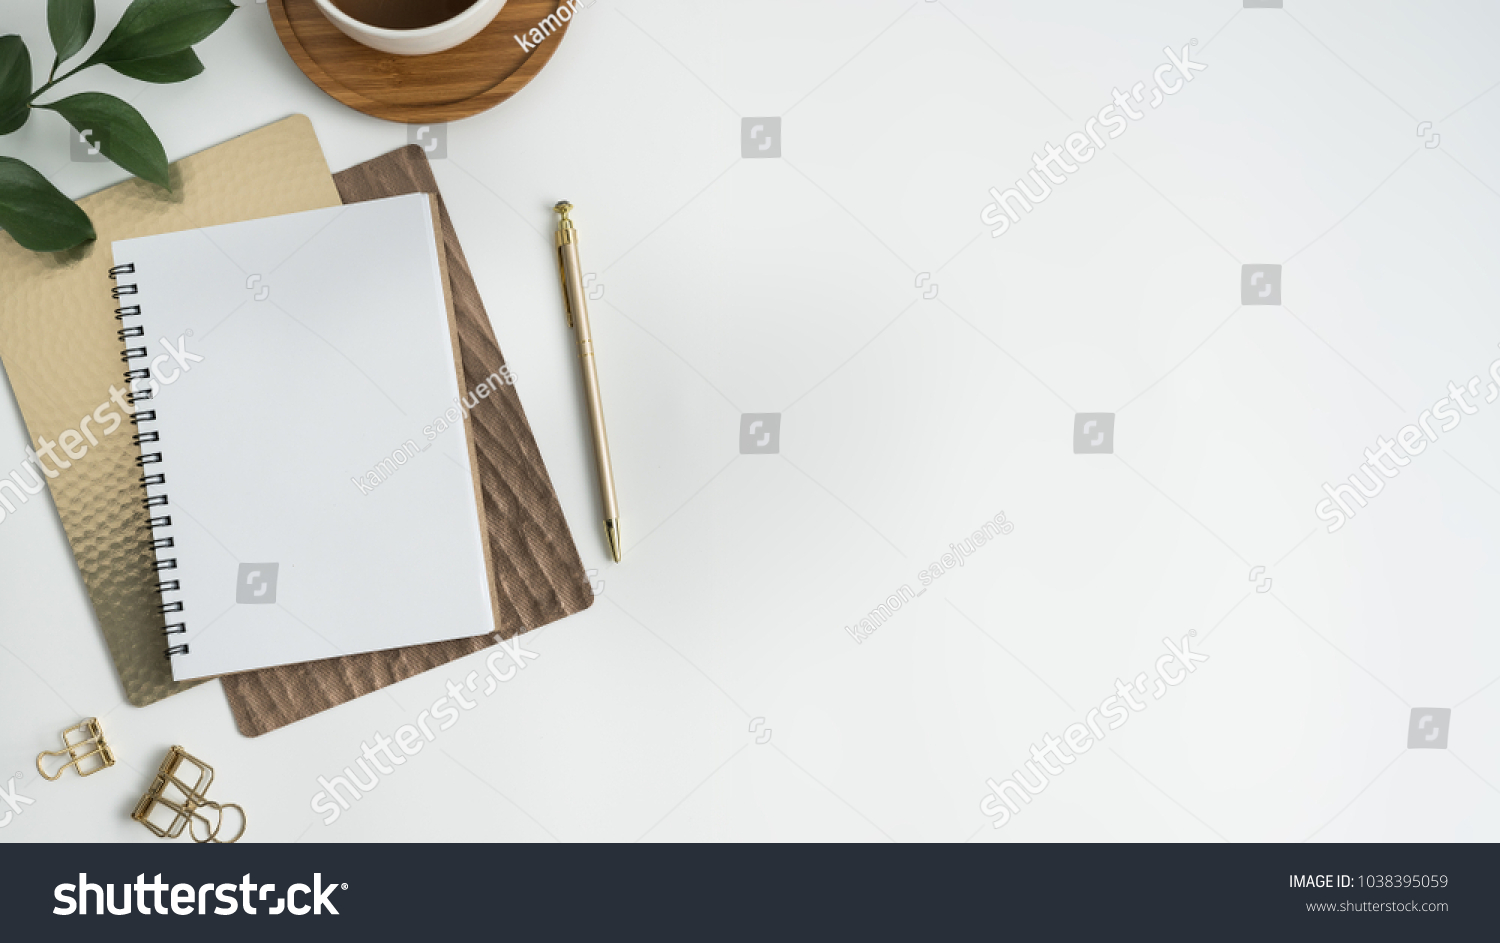 Flat lay, top view office table desk. Workspace with blank clip board, keyboard, office supplies, pencil, green leaf, and coffee cup on white background. #1038395059